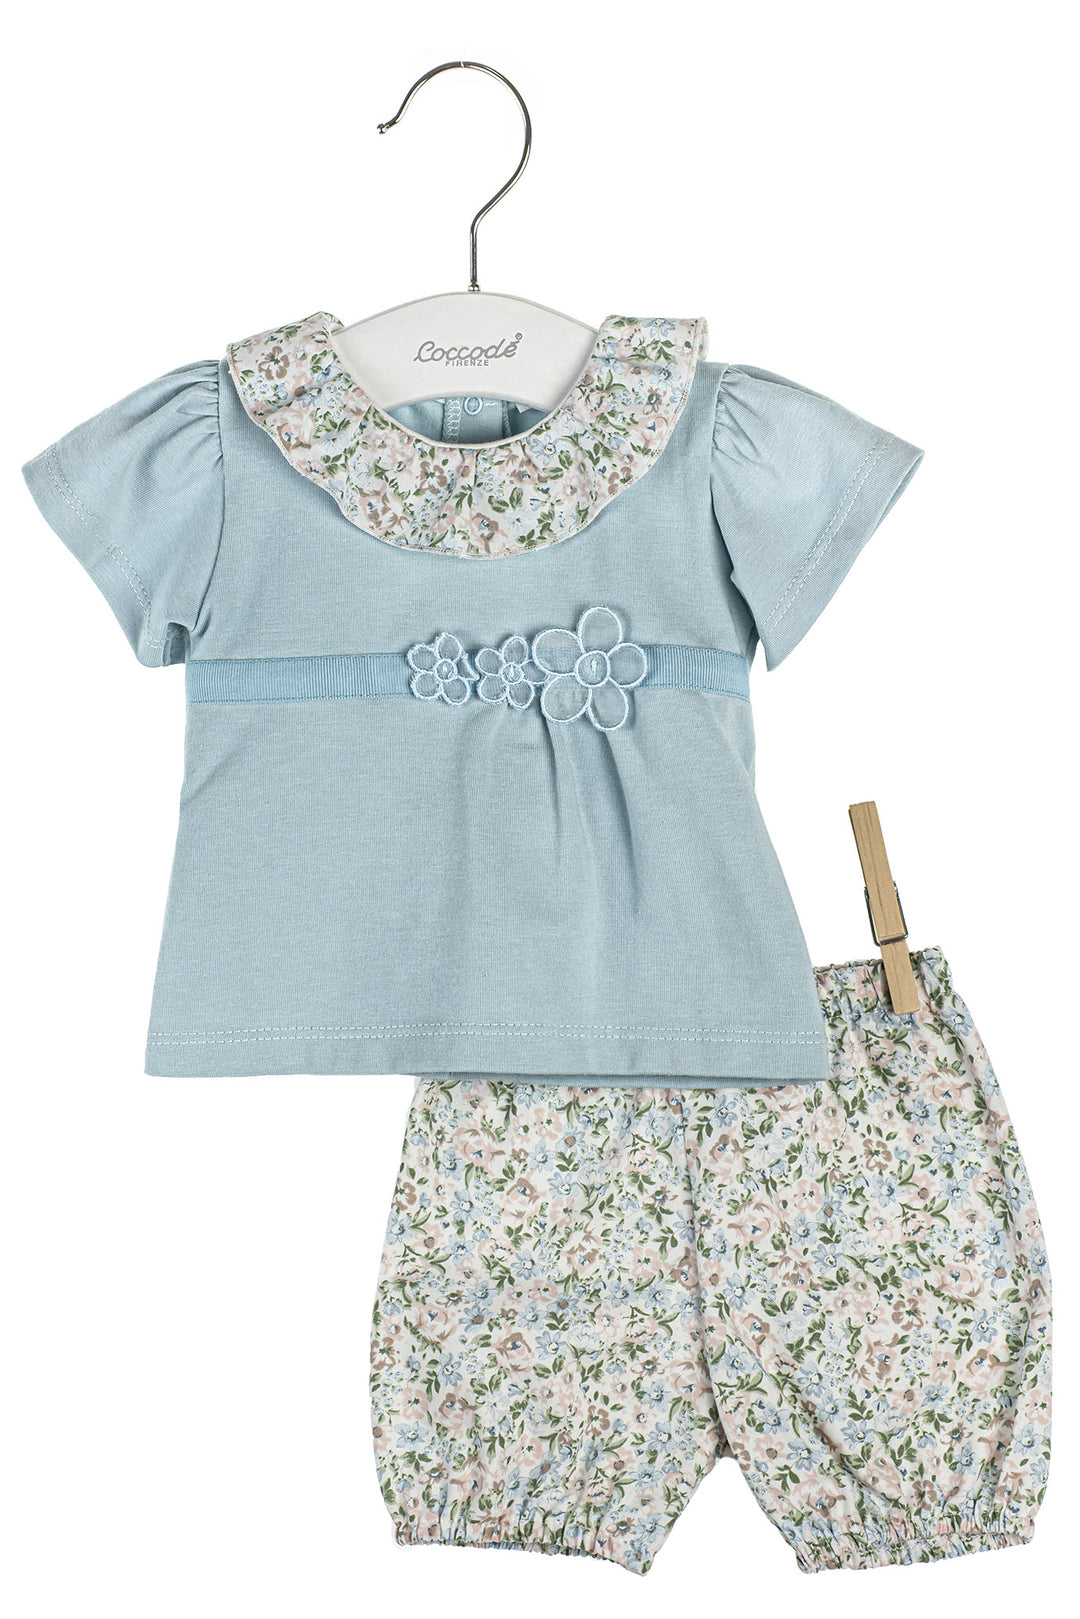 Coccodè "Frieda" Powder Blue Floral Top & Bloomers | iphoneandroidapplications